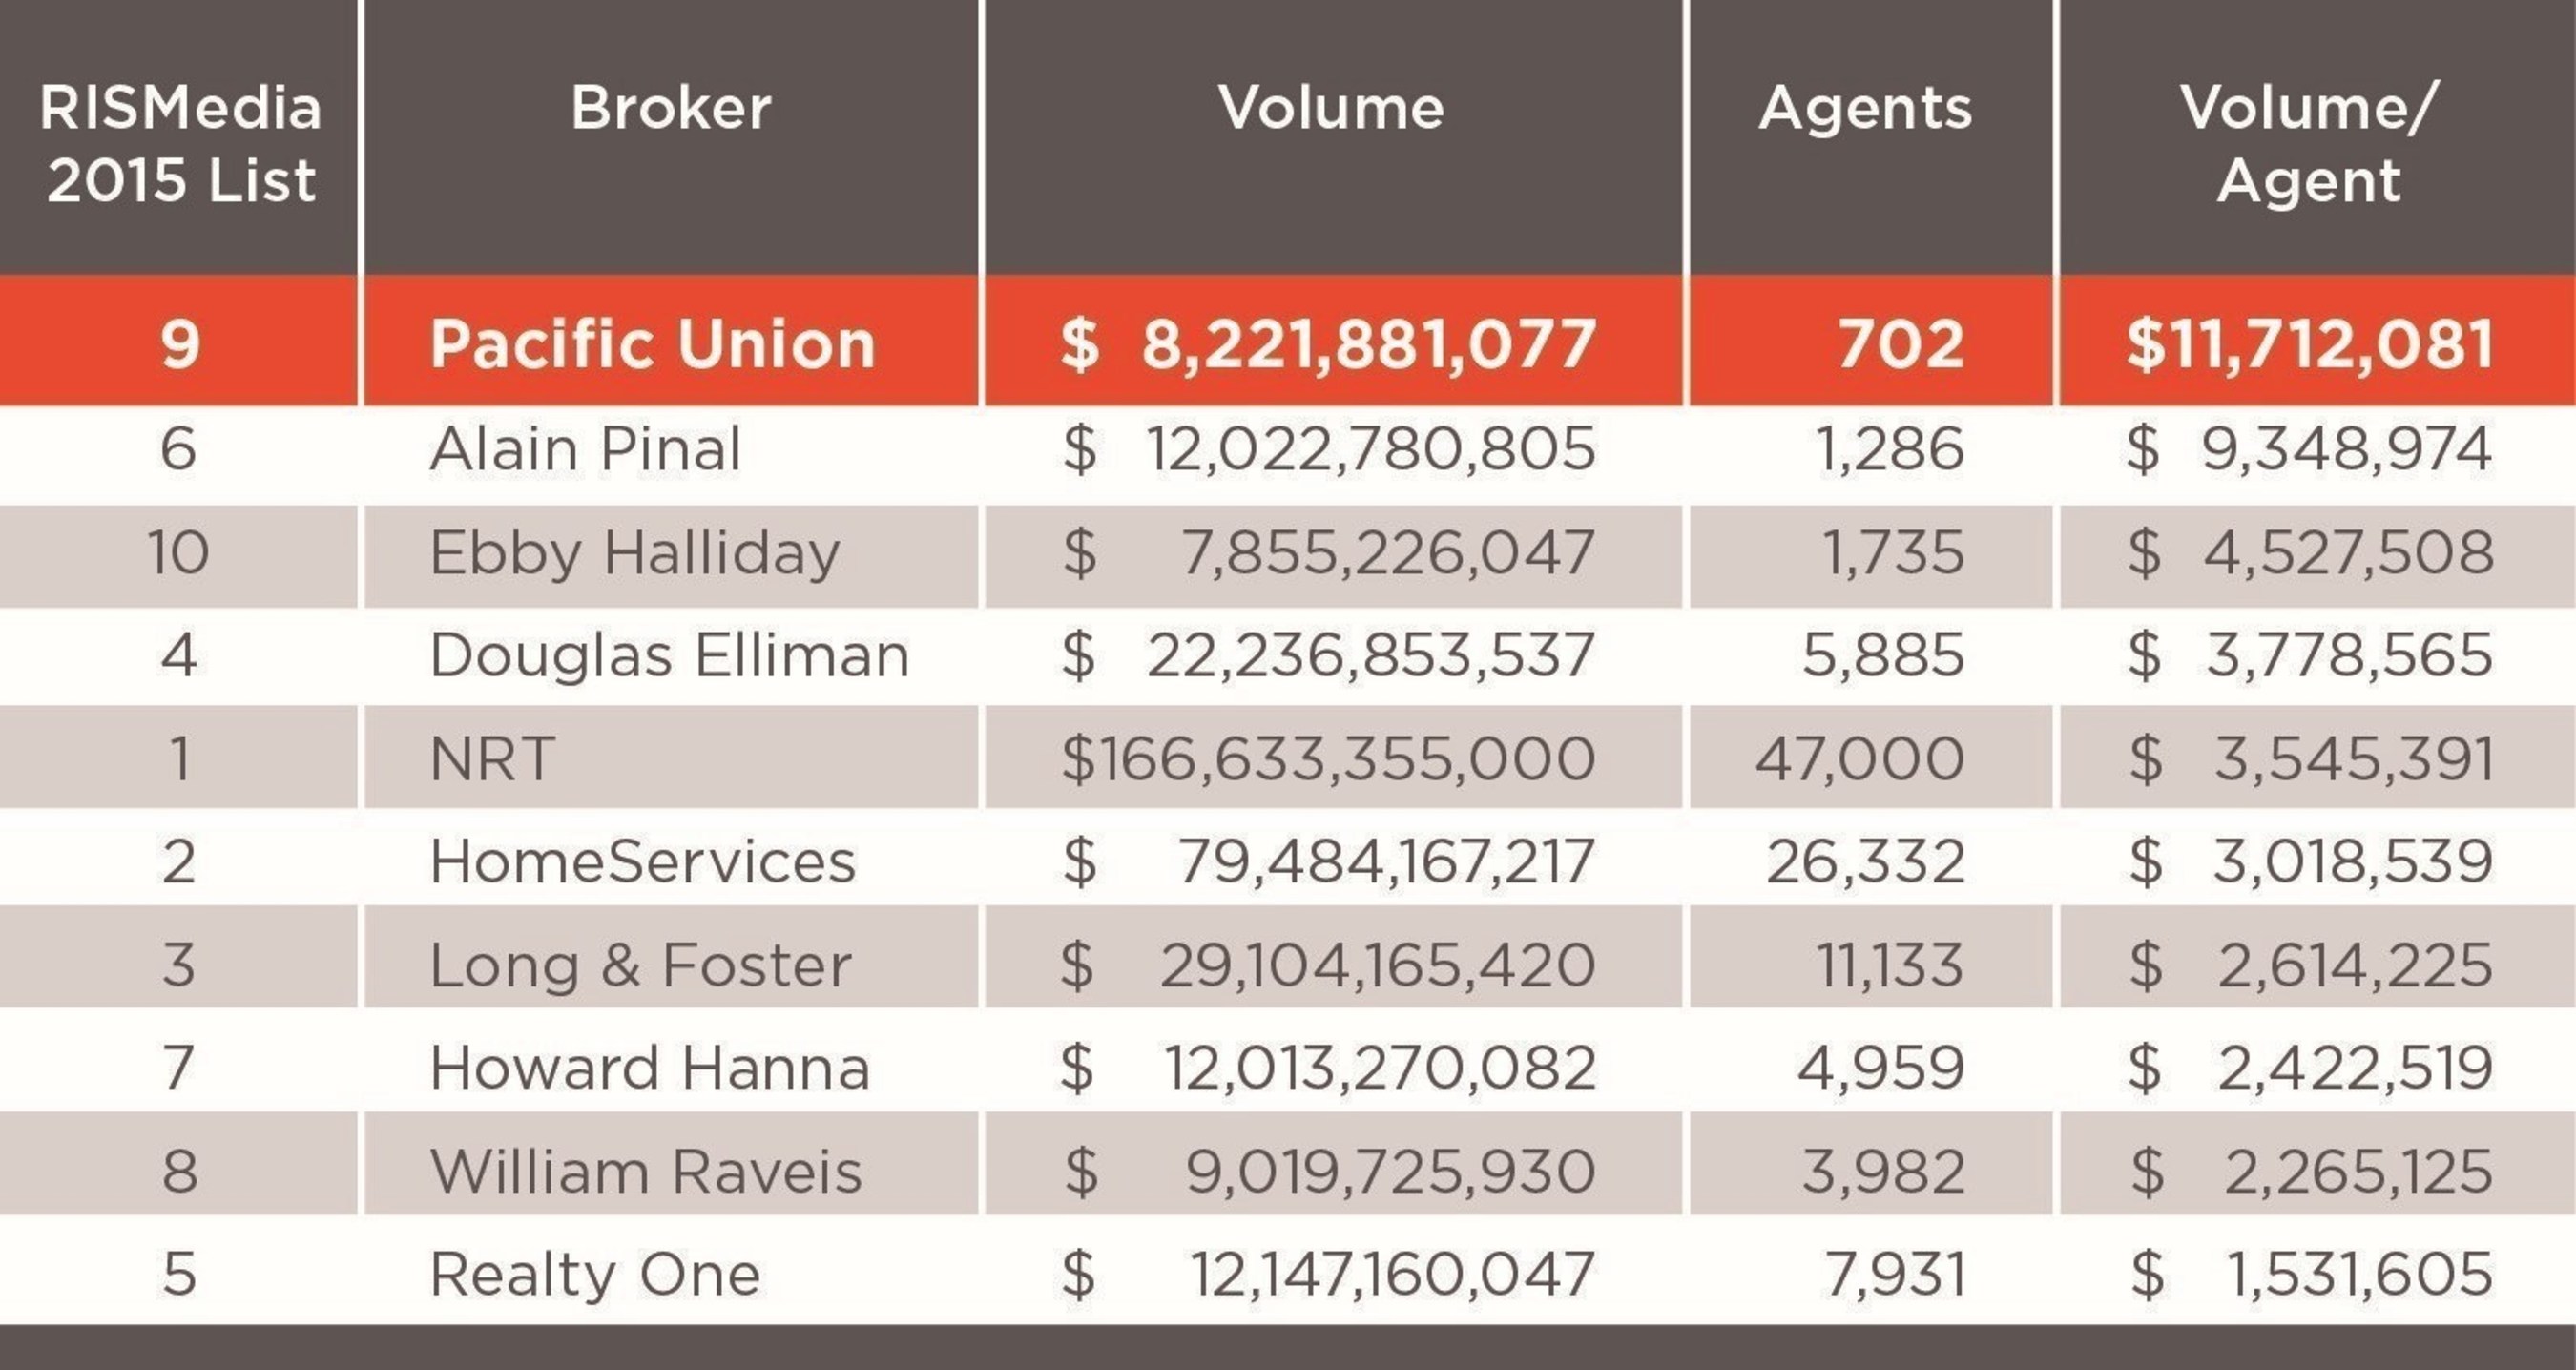 RISMedia 2016 Power Broker report, modified by Pacific Union.